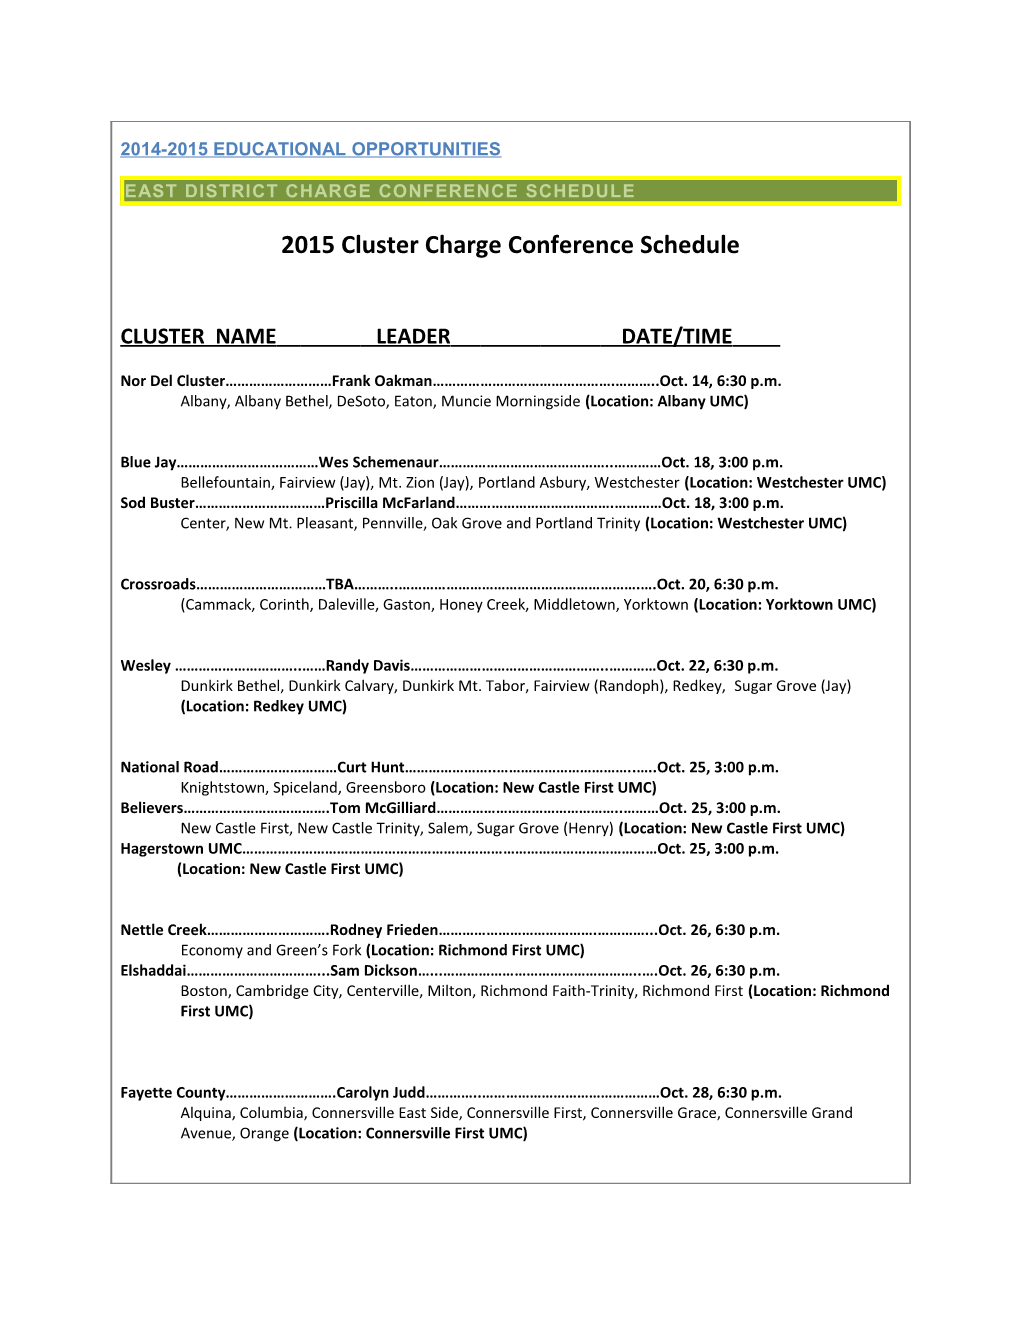 East District Charge Conference Schedule